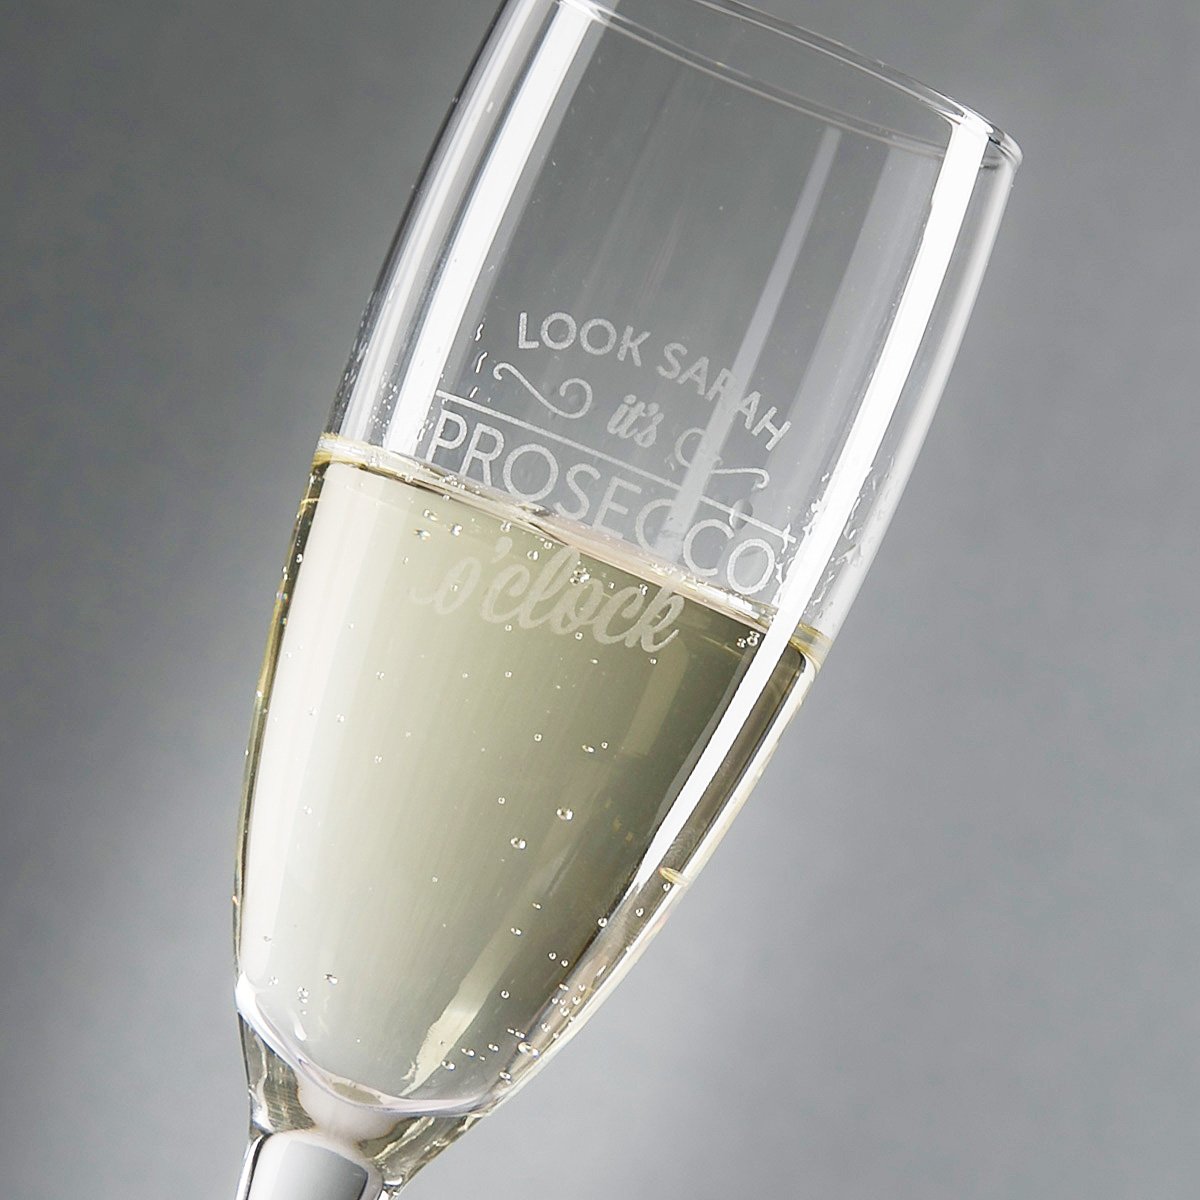 Personalised Engraved Champagne Flute - Prosecco O'clock